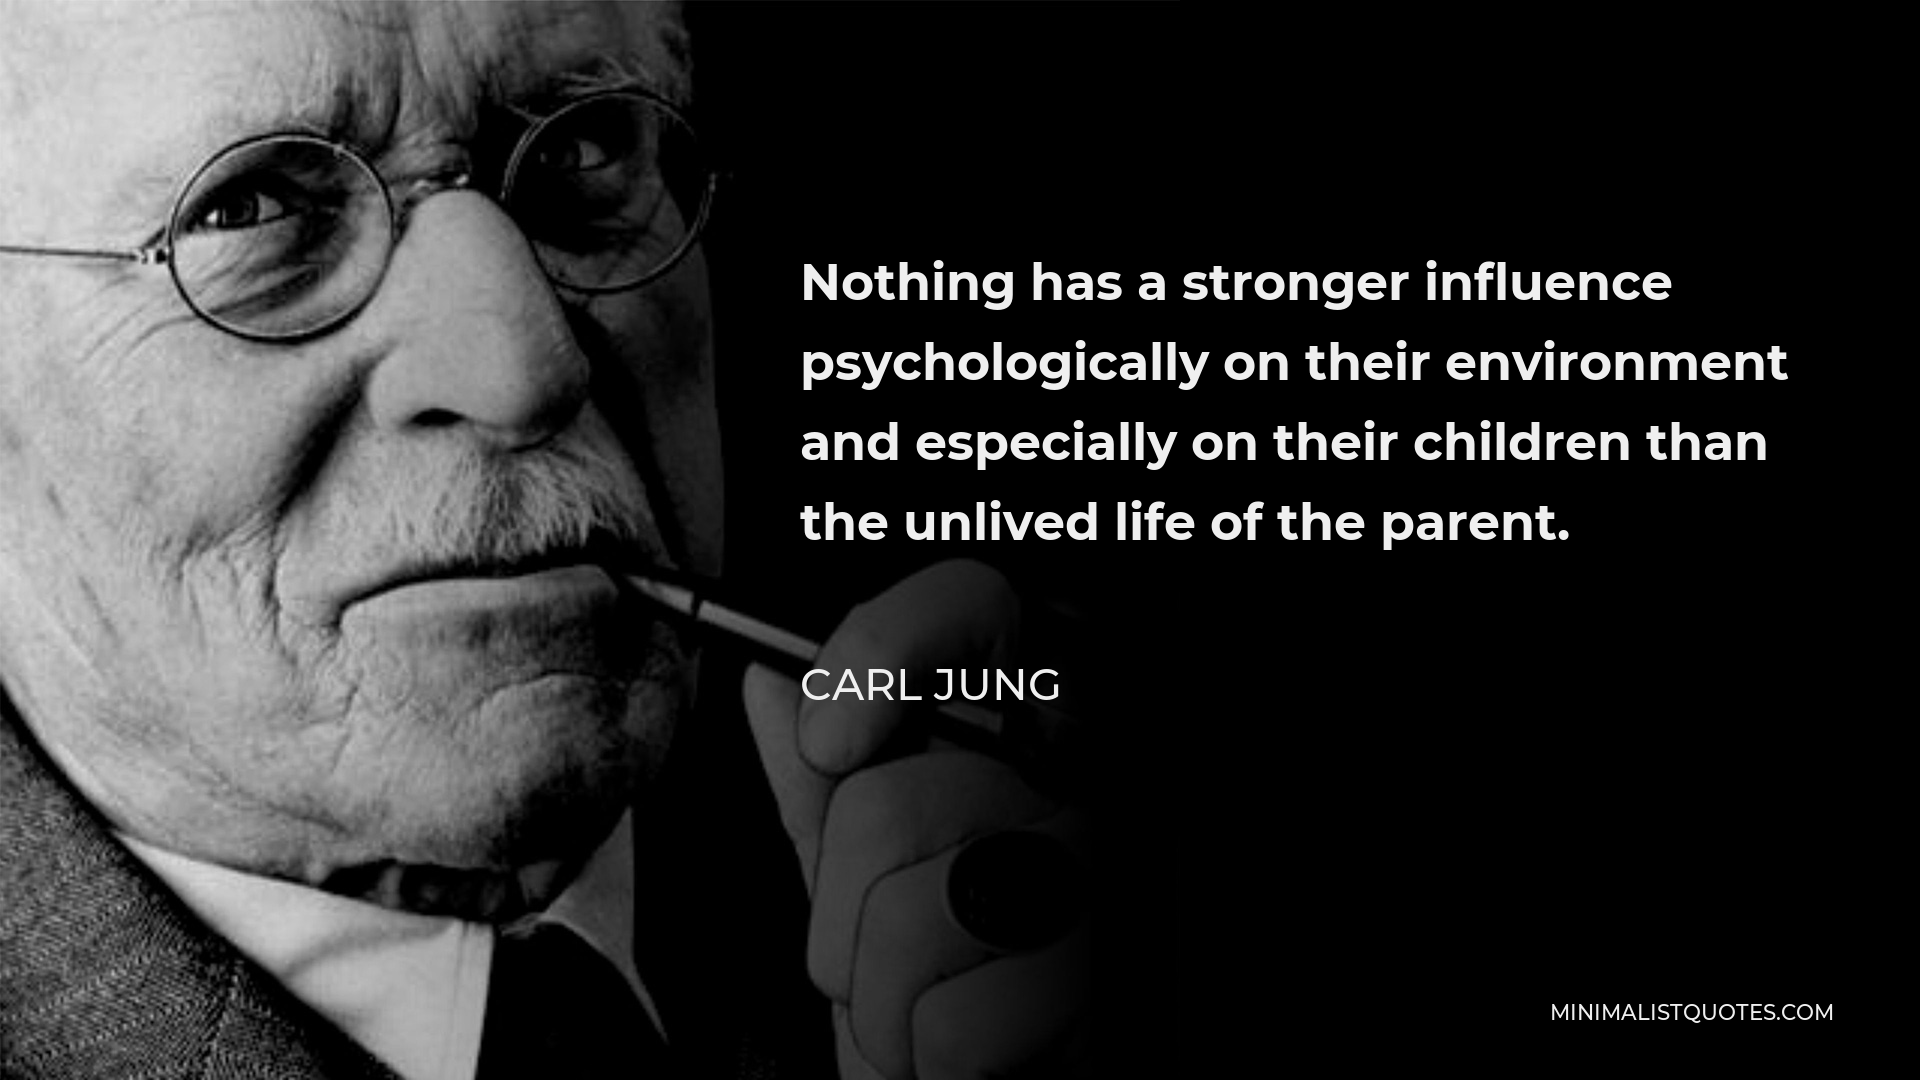 Carl Jung Quote - Nothing has a stronger influence psychologically on their environment and especially on their children than the unlived life of the parent.